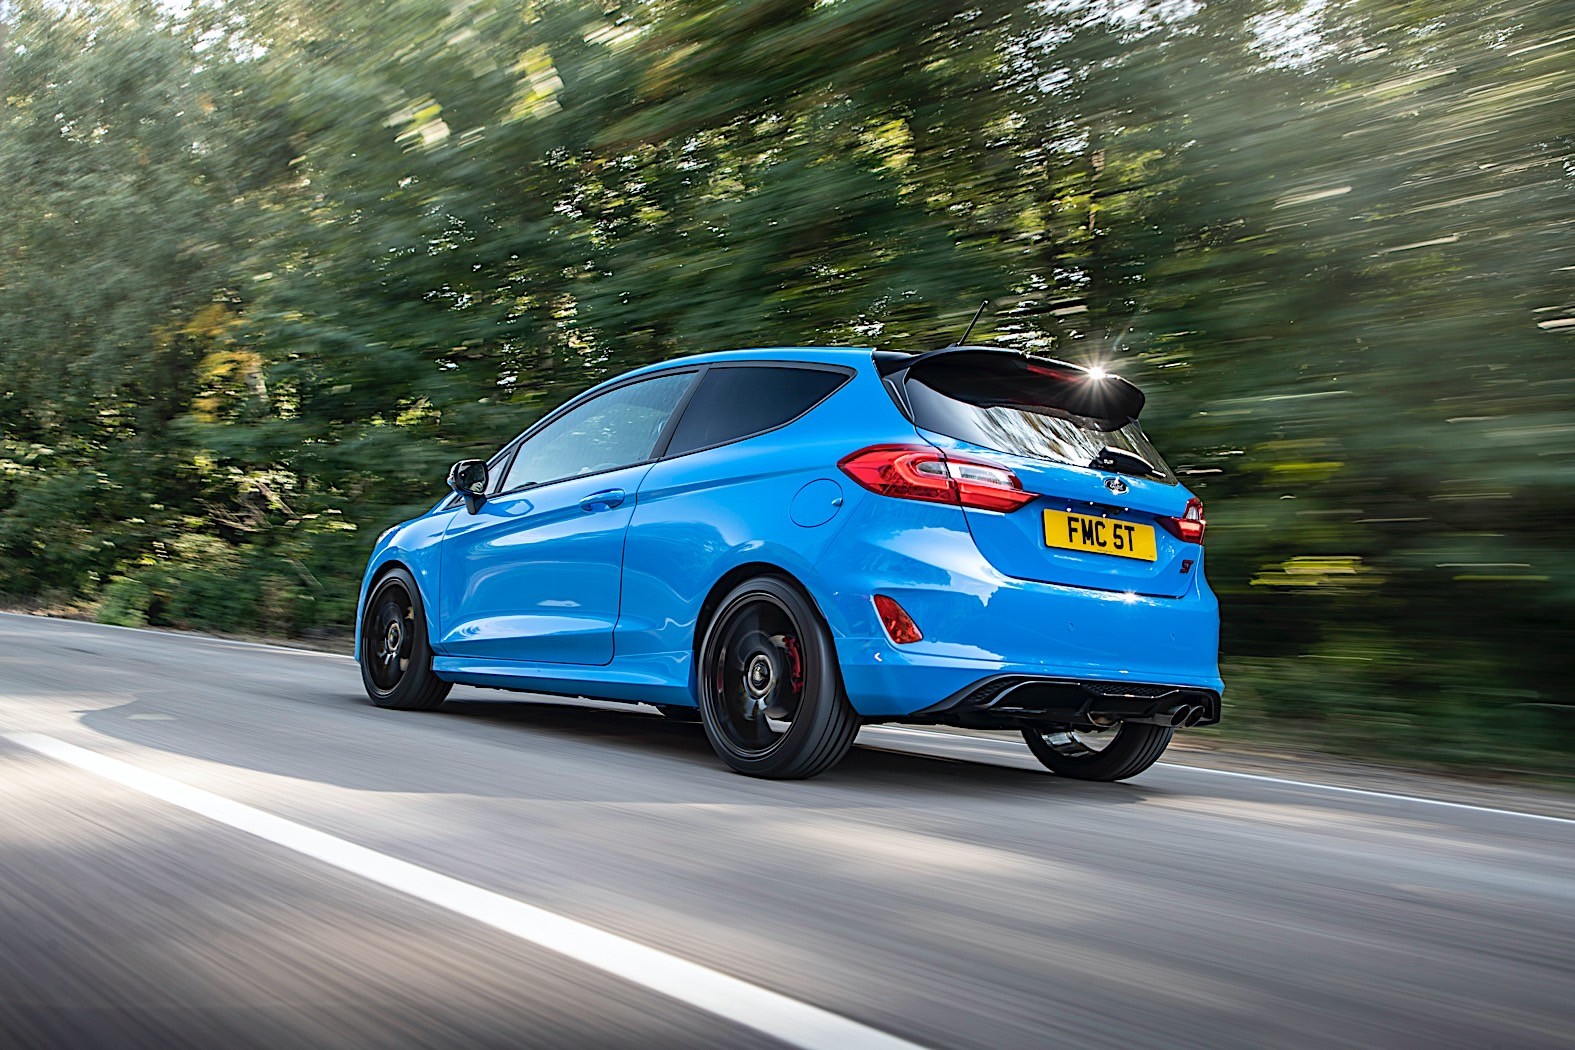 Ford Fiesta St Gets Low On New Suspension Uk Gets The Bulk Of Limited